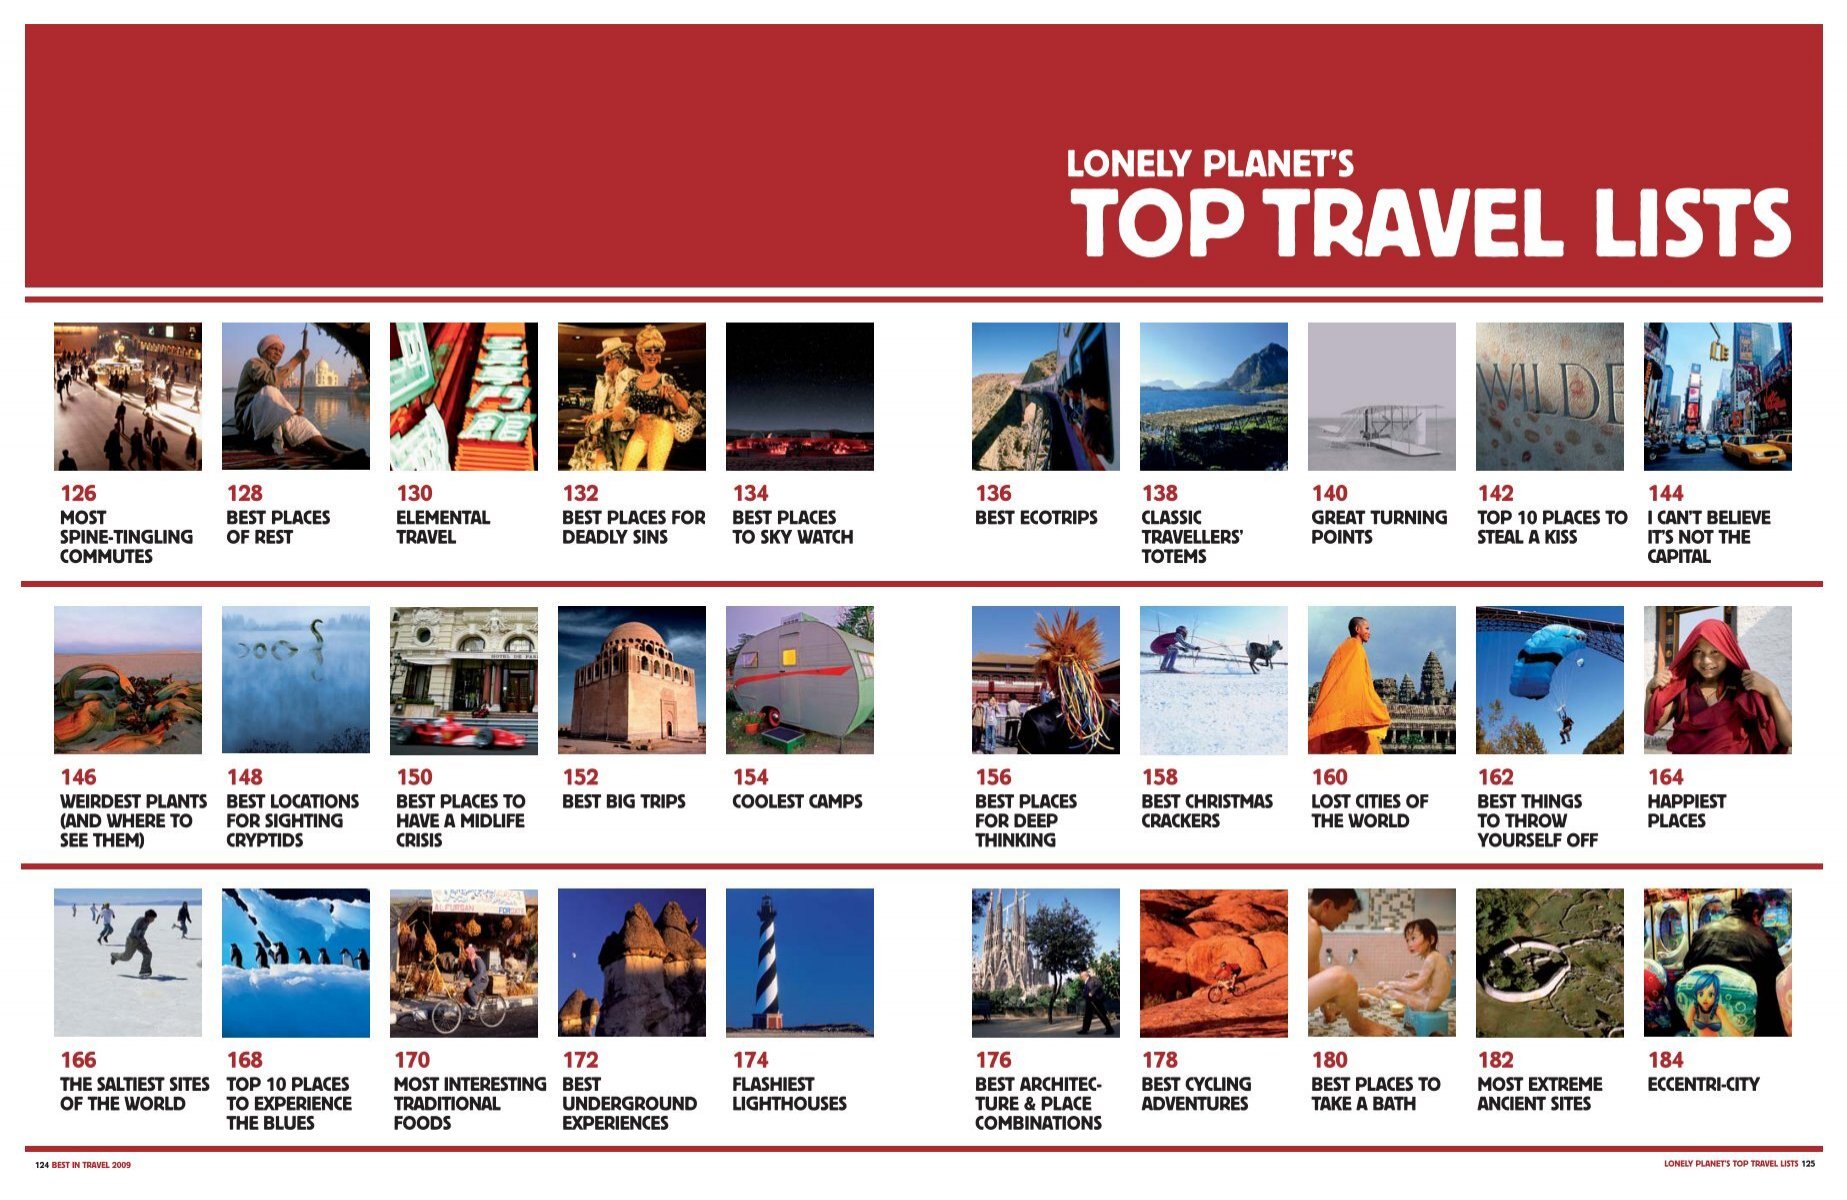 Lonely planet's top travel lists